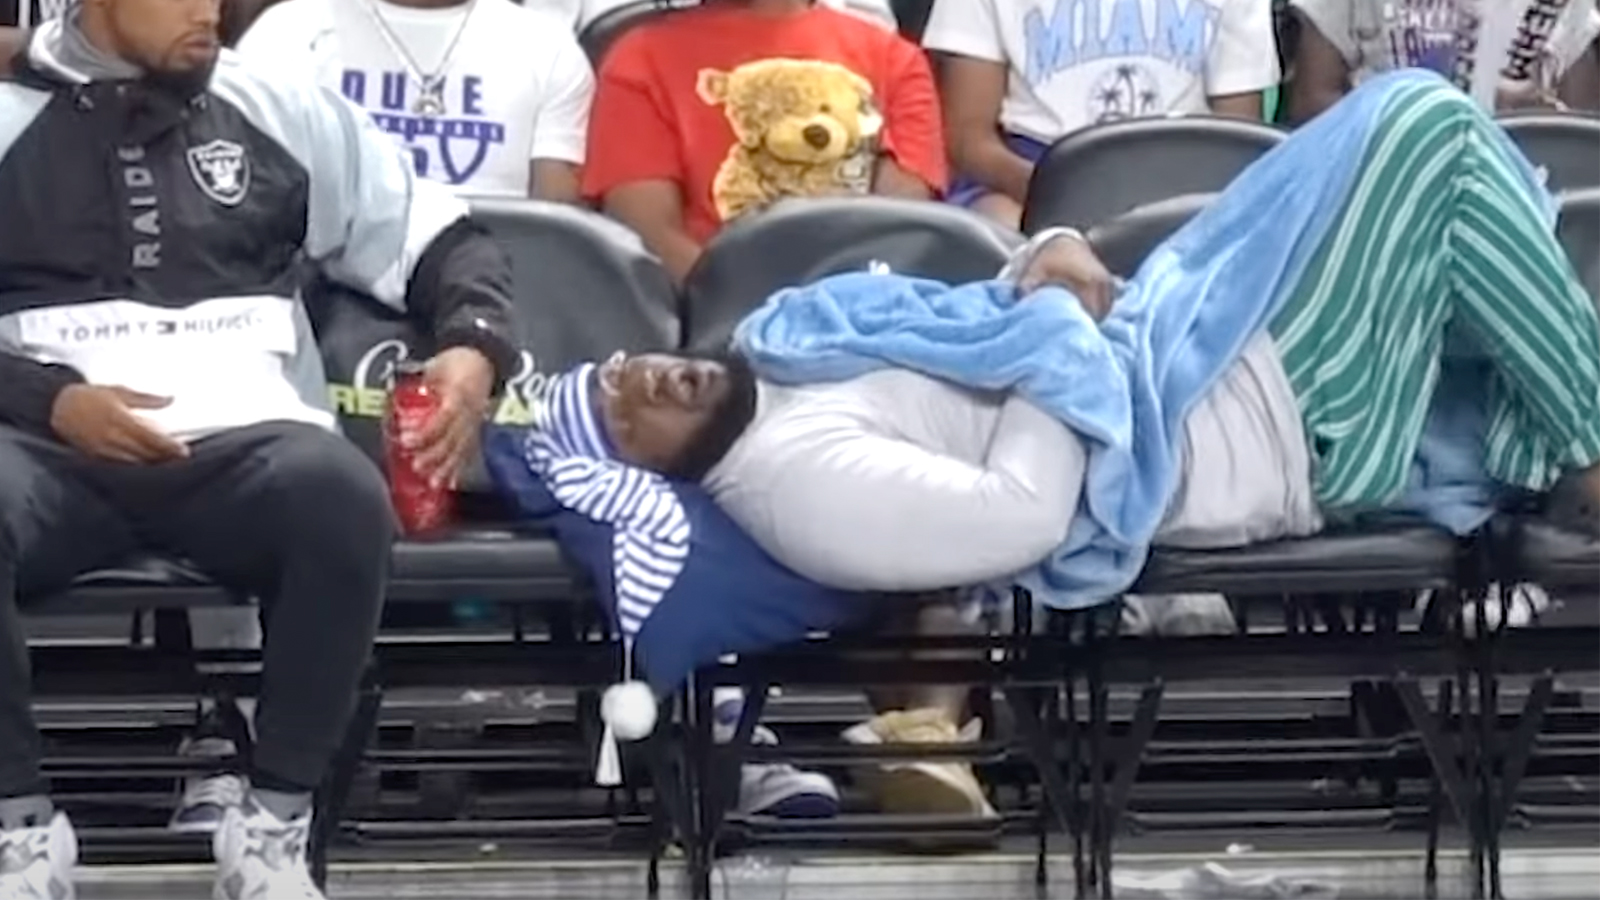 JiDion banned from all NBA related events for sleeping at WNBA game